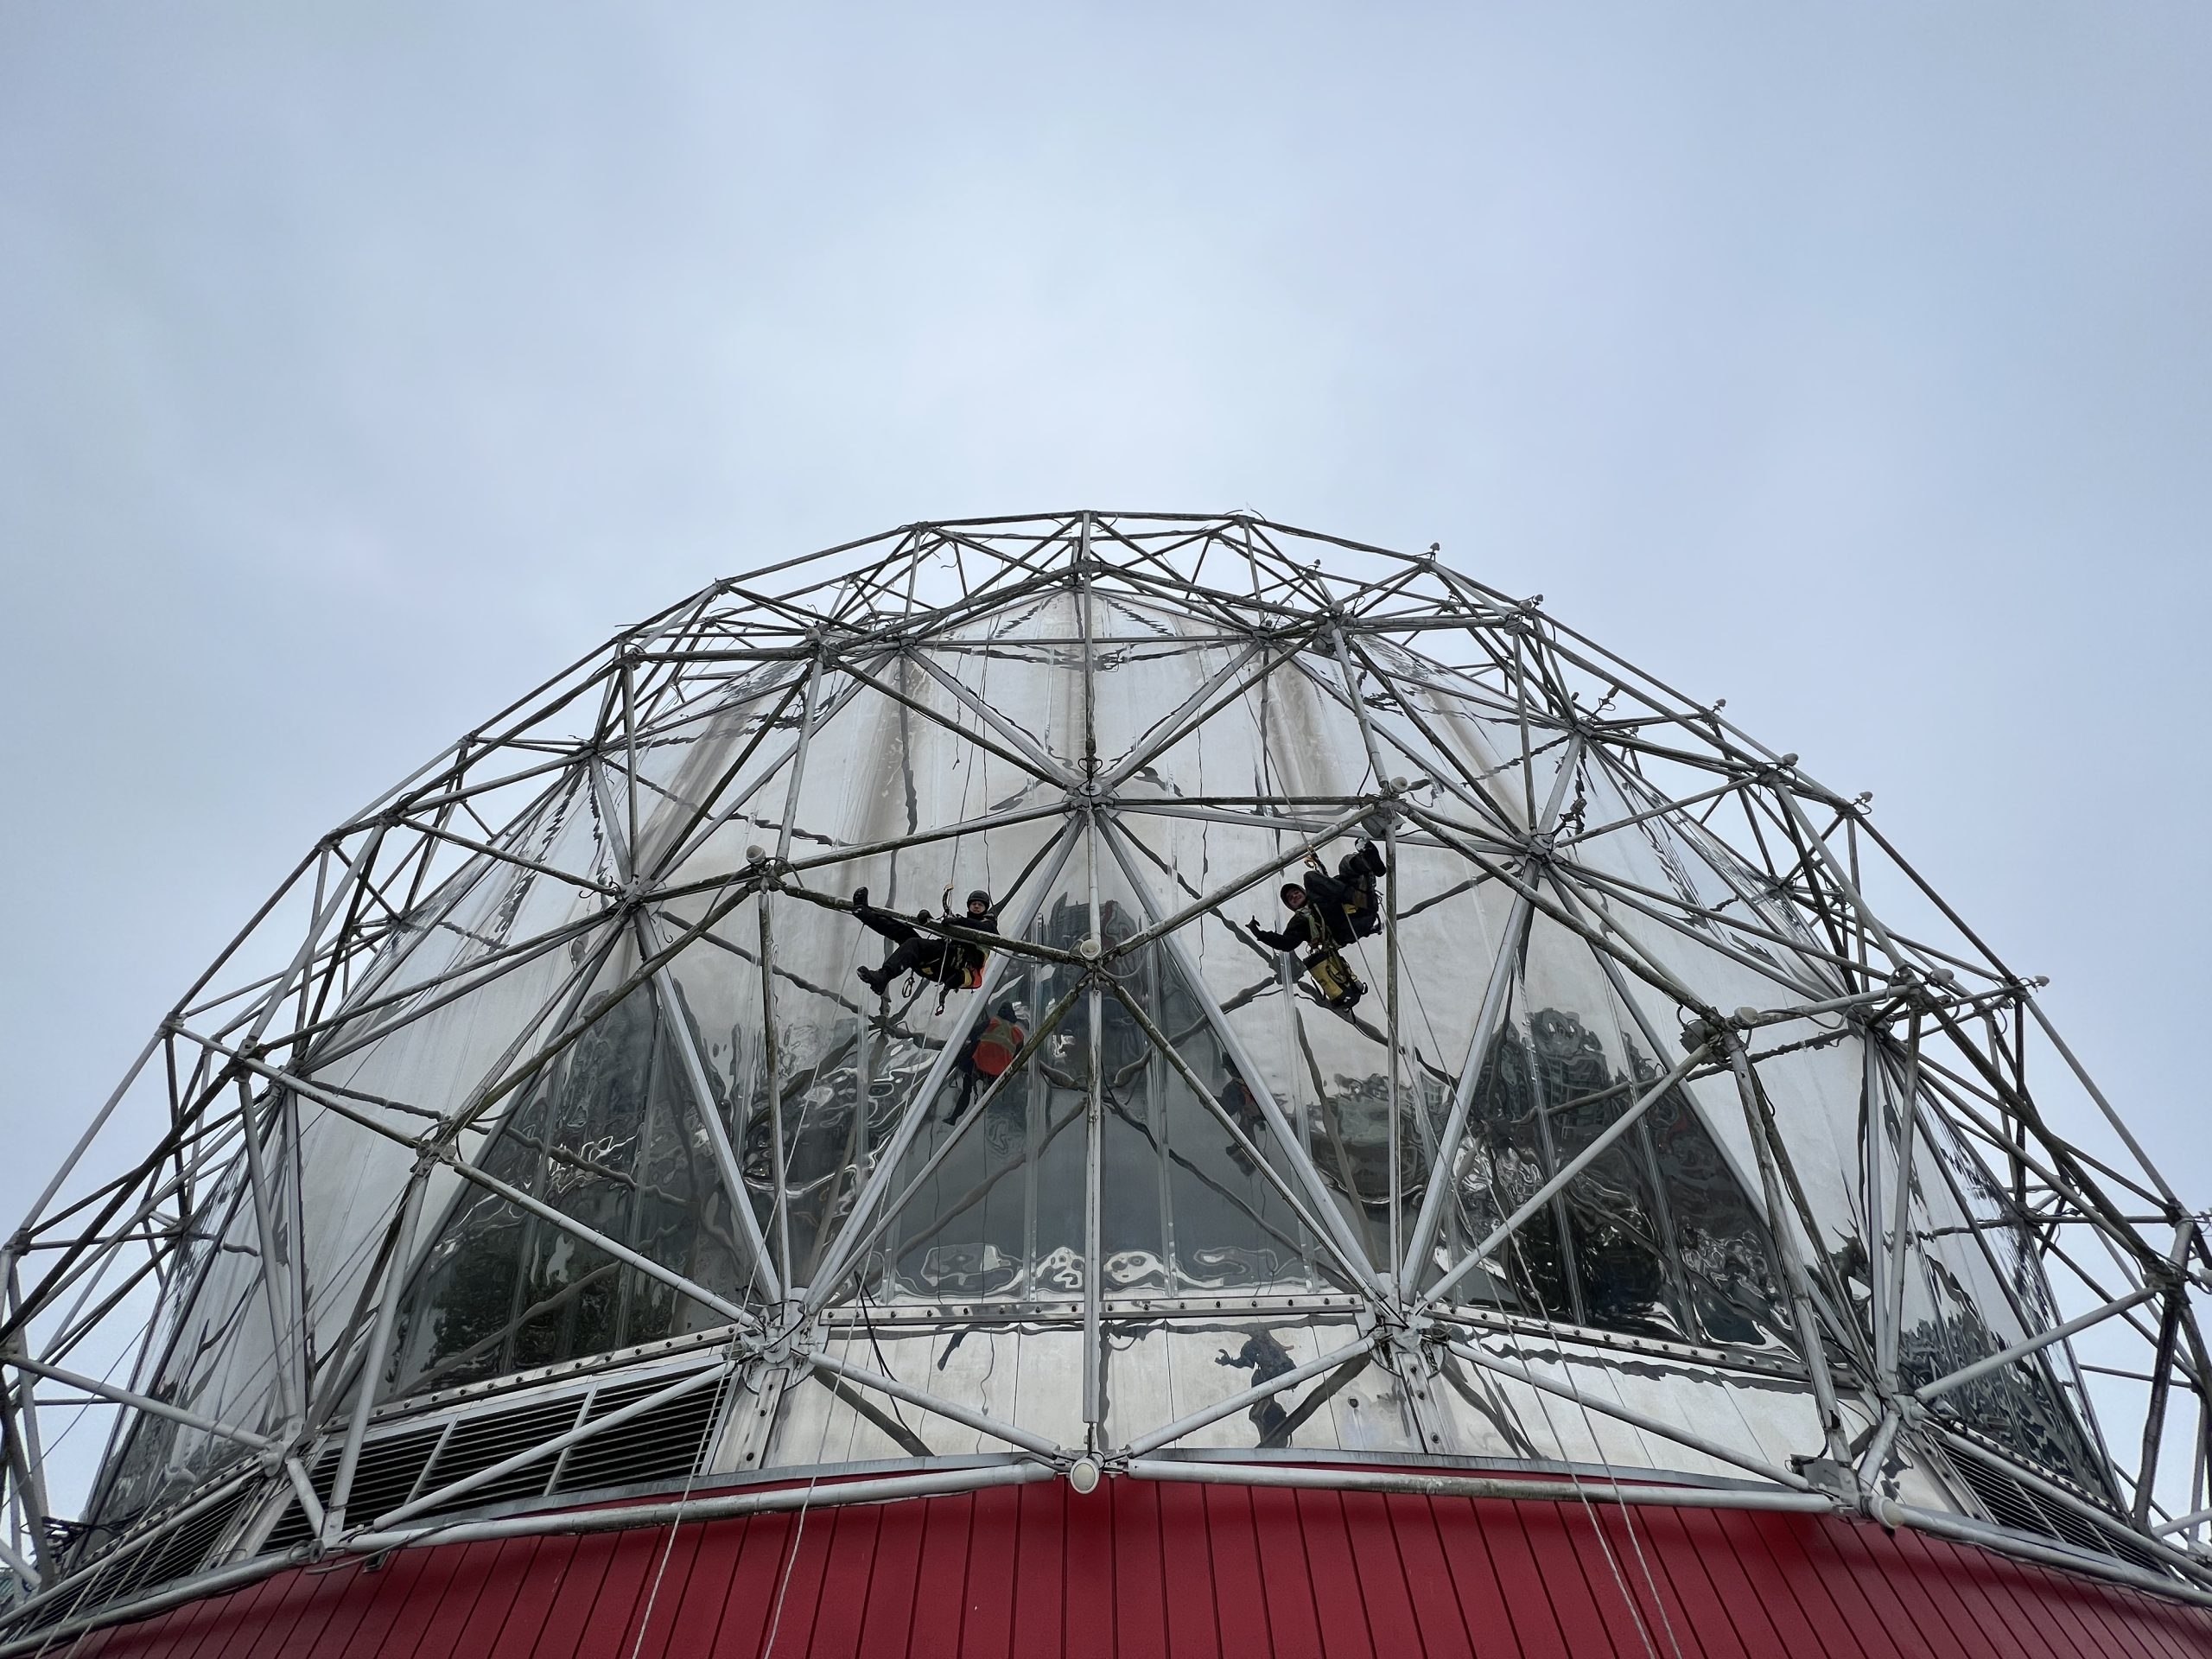 Two Rope Access technicians Hang from the structure on the Science World Dome Repairing Lights